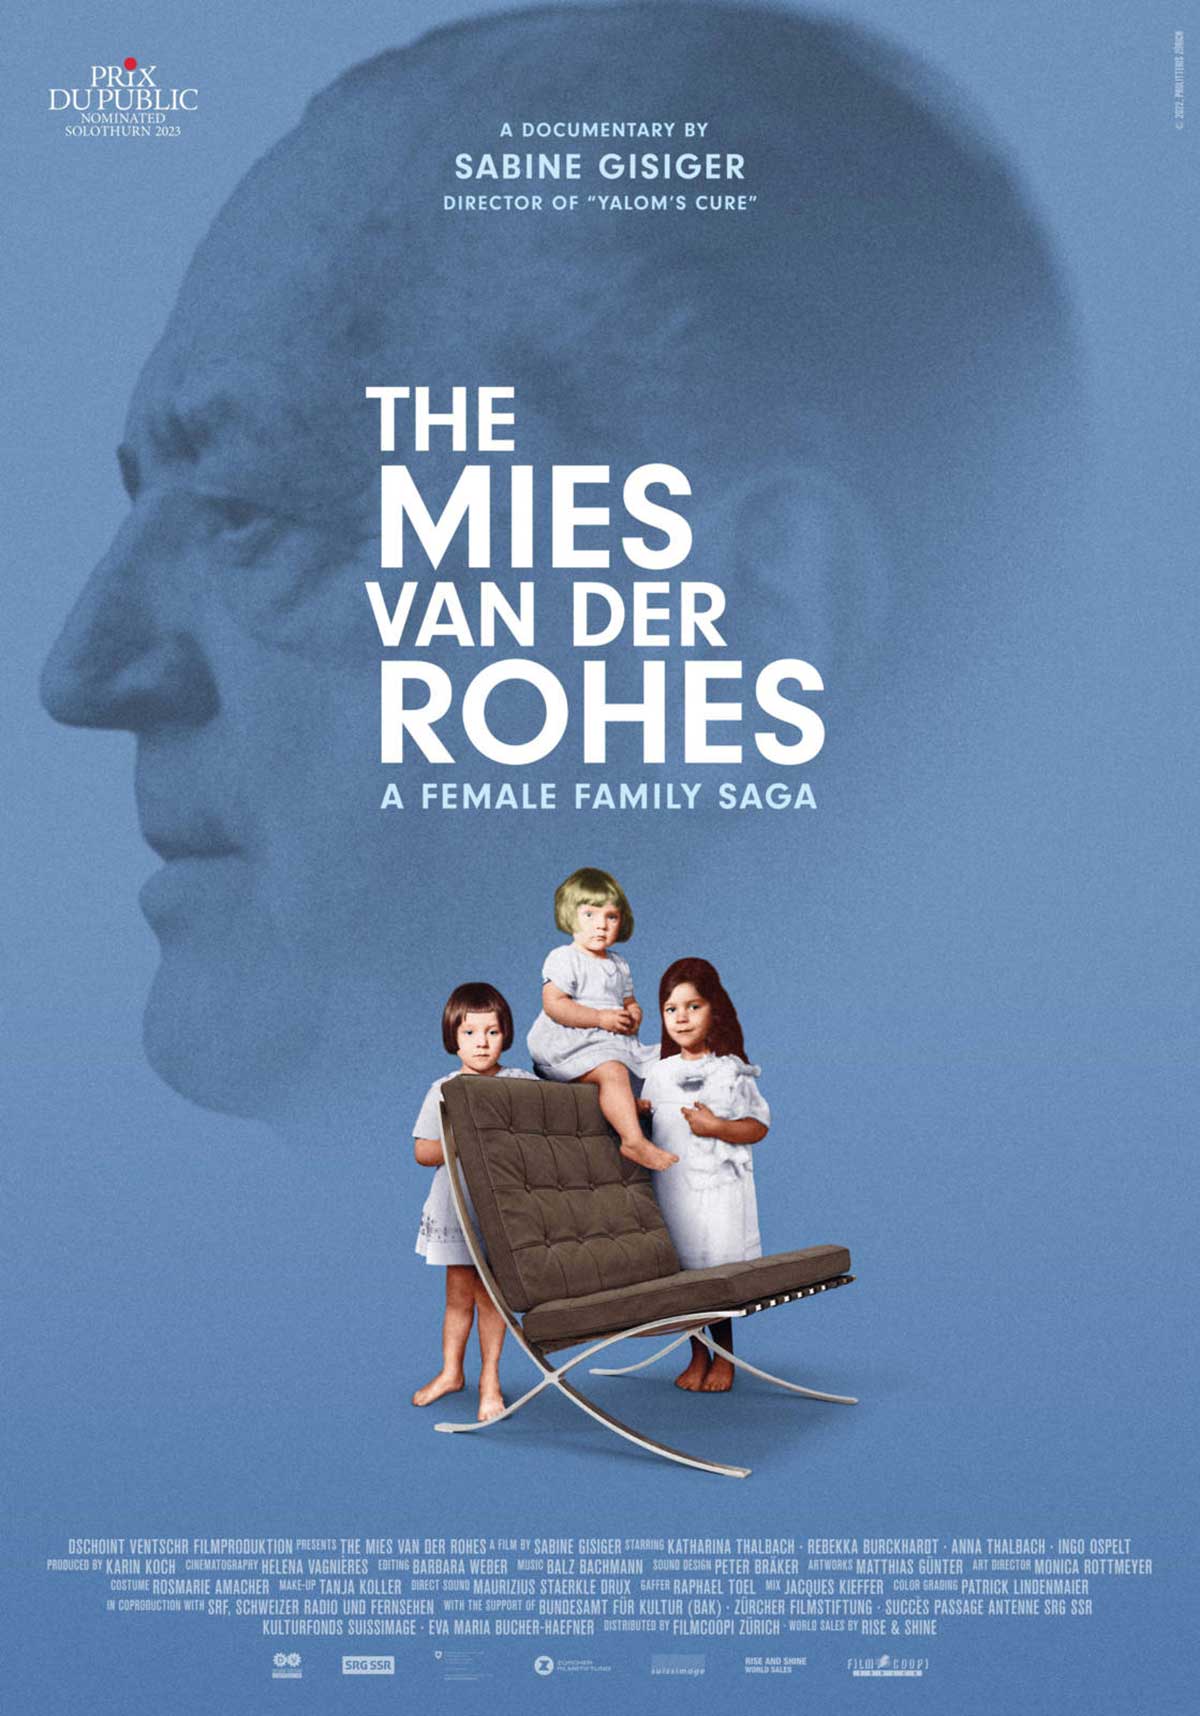 Promotional poster for the Mies van der Rohes.